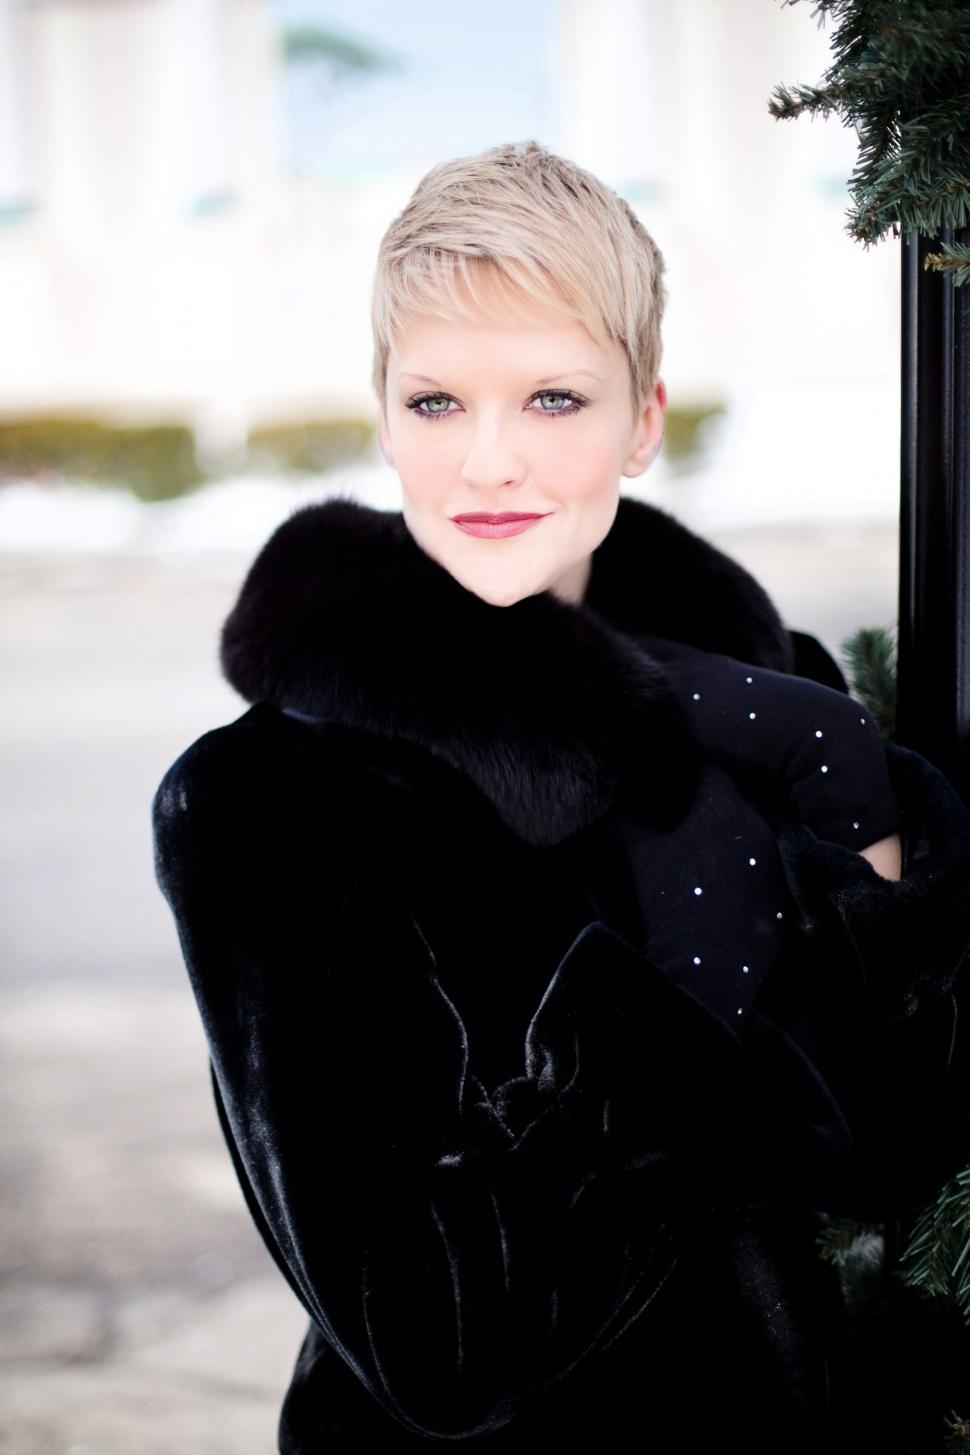 Free Image of Female Fashion Model With Short Blonde Hair 